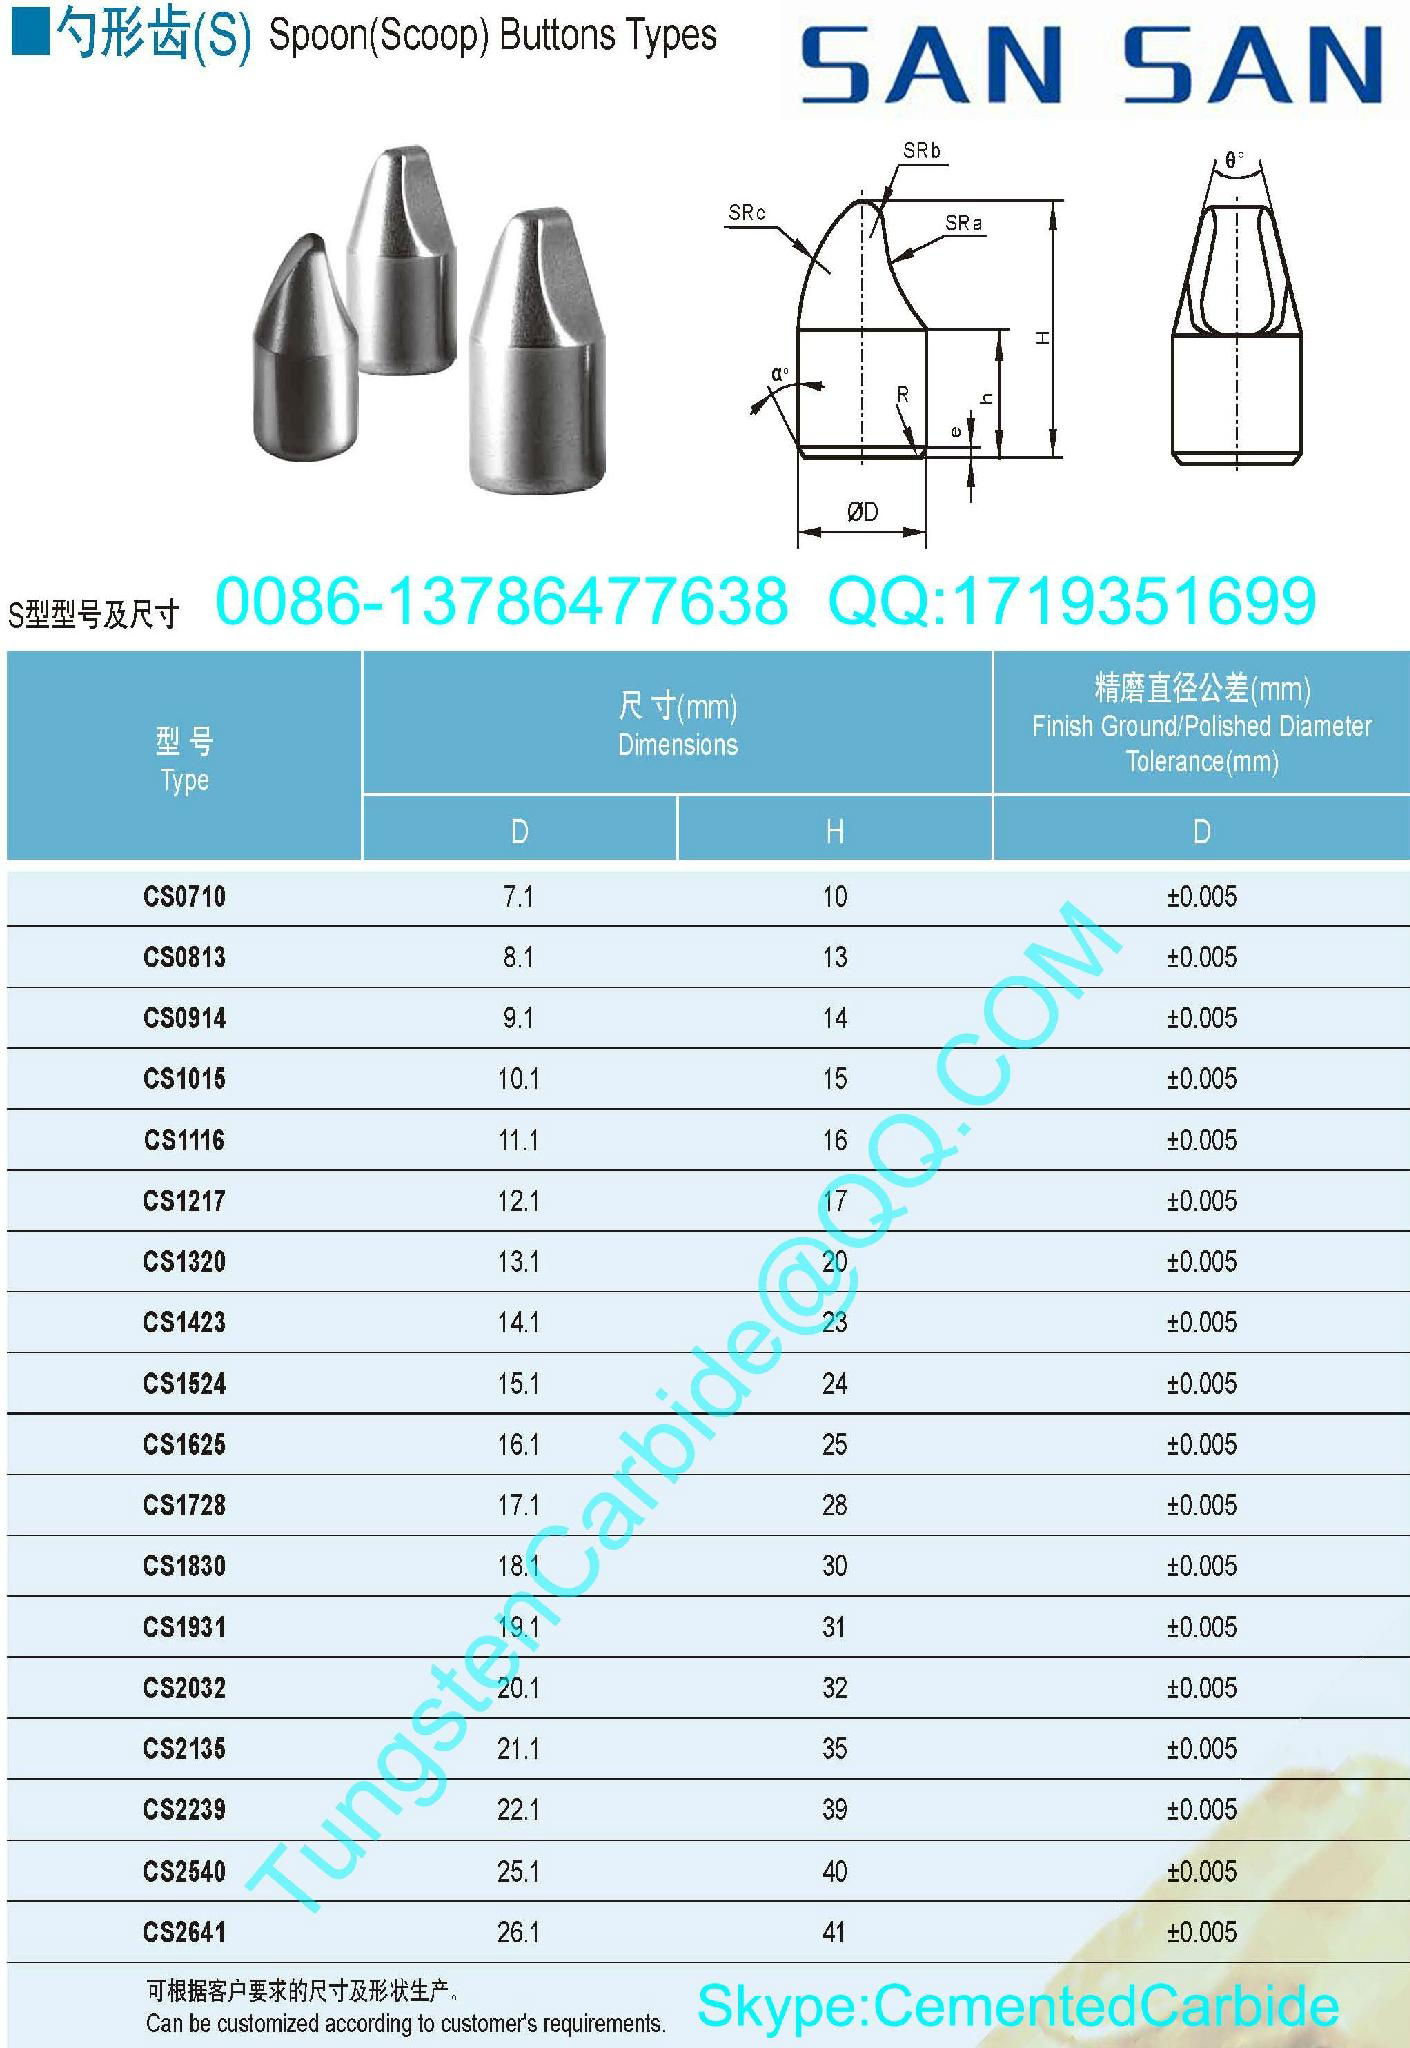 Tungsten Carbide Dome(Spherical) Buttons Types 5